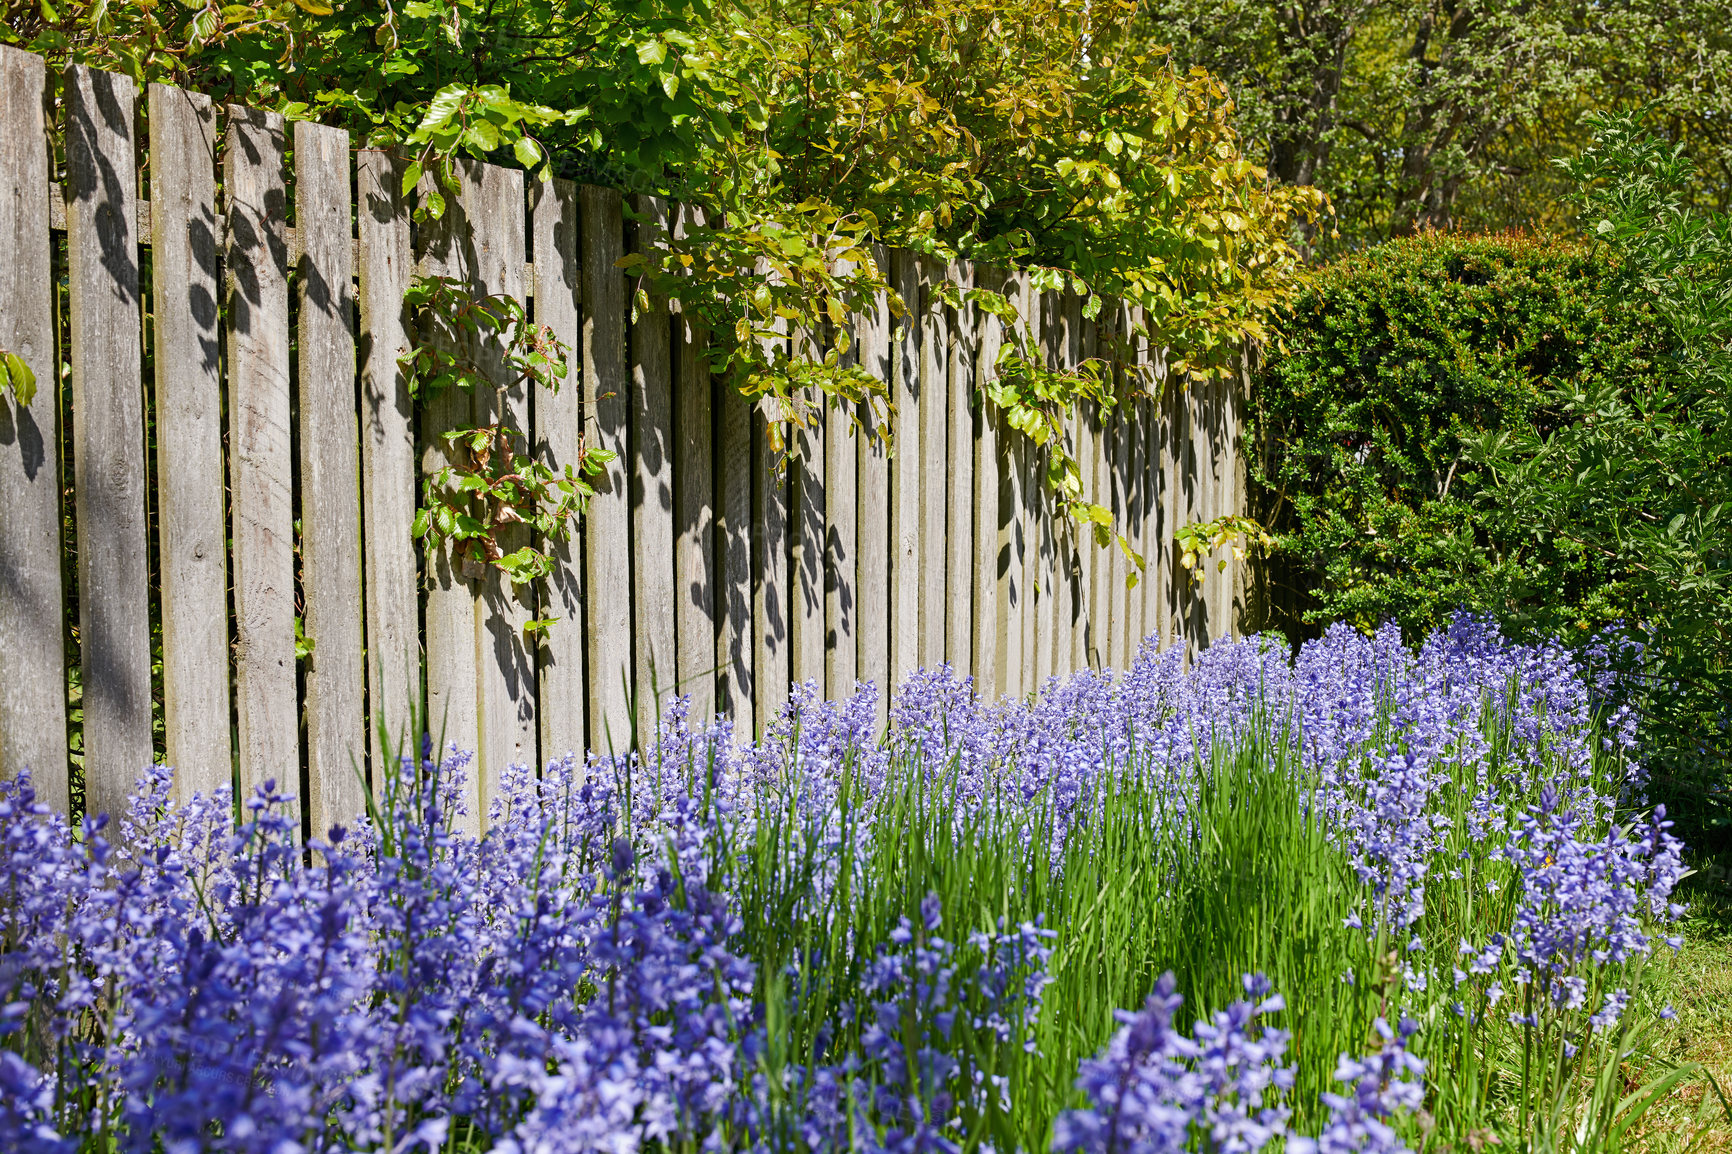 Buy stock photo Rows of Bluebell growing in a green garden in outdoors with a wooden gate background. Many bunches of blue flowers in harmony with nature, tranquil wild flowerbed in a zen, quiet backyard 